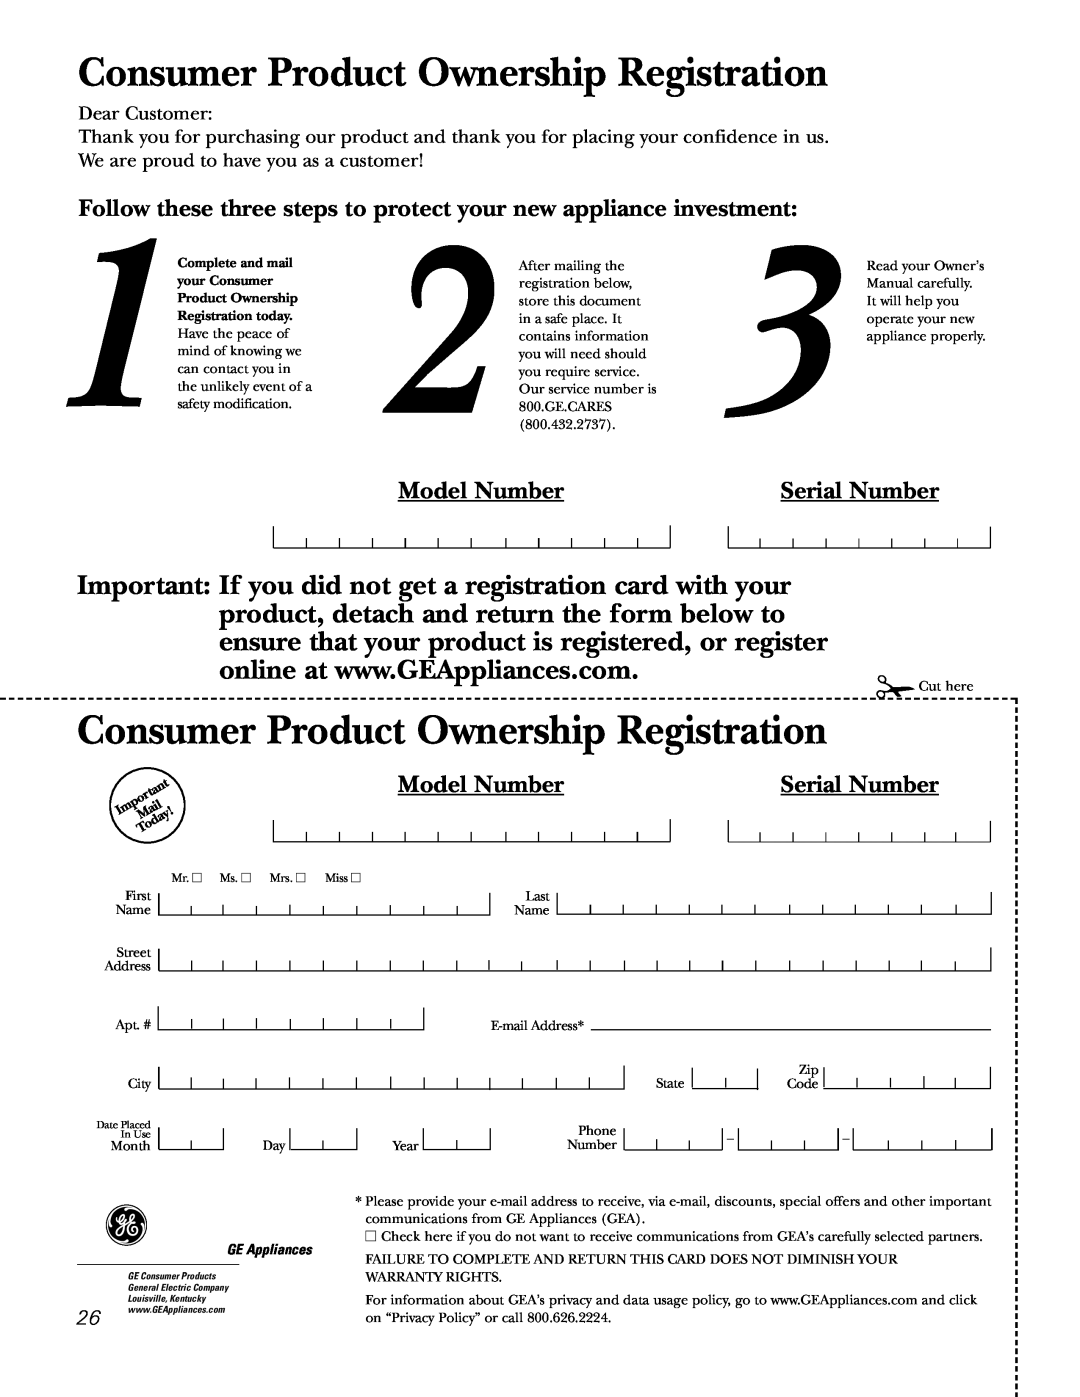 GE JRP 28 Model Number, Serial Number, Consumer Product Ownership Registration, Complete and mail, your Consumer 